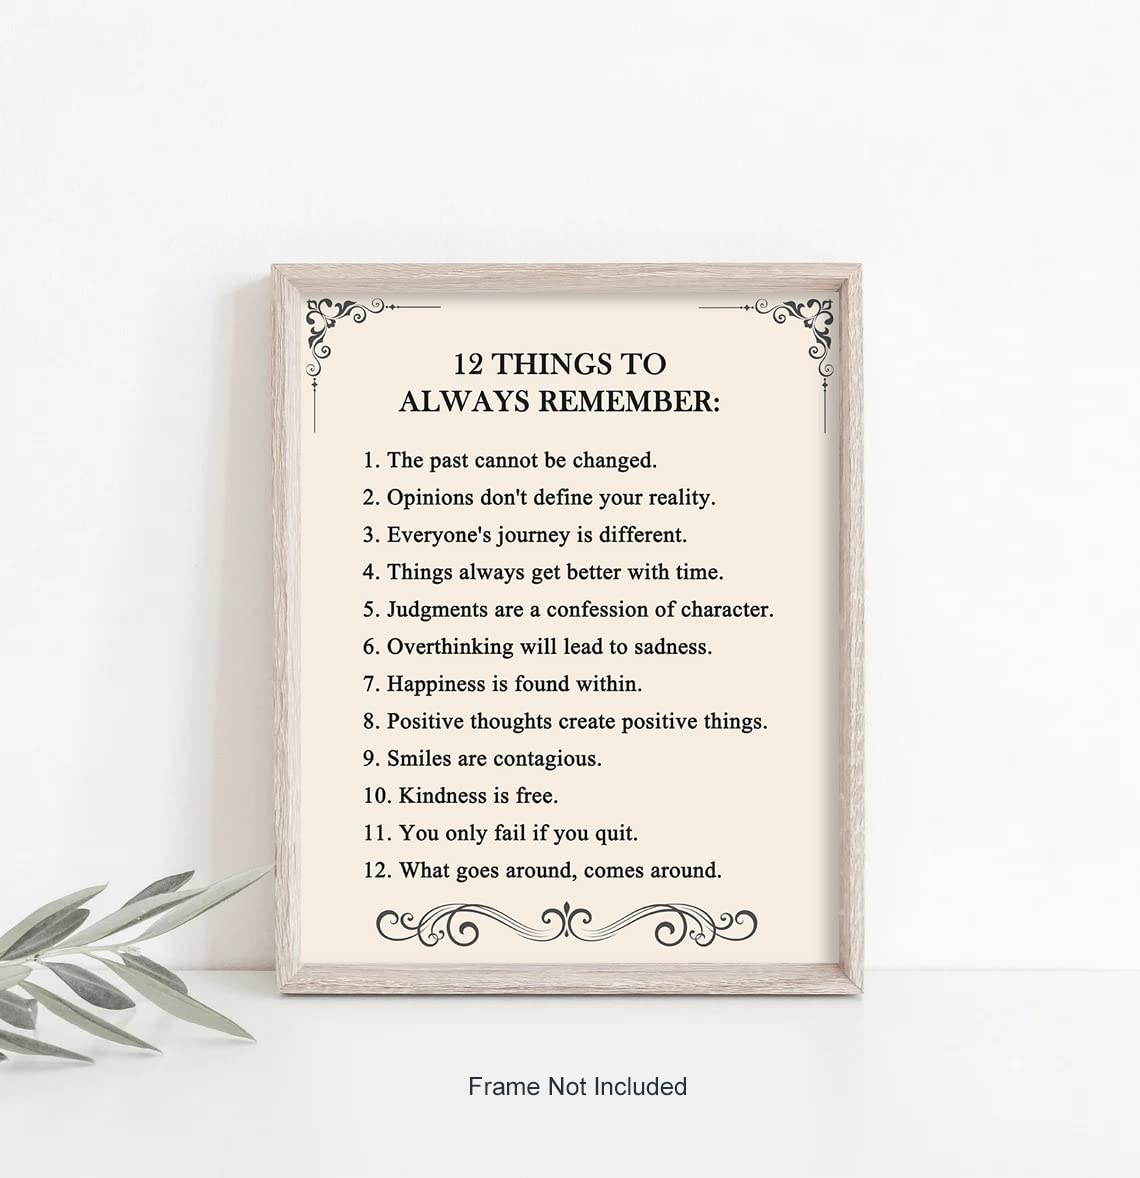 "12 Things to Always Remember"- Inspirational Wall Art- Positive Thinking Artwork Décor-Life Quotes Poster- Reminders UNFRAMED Print (8"x10")